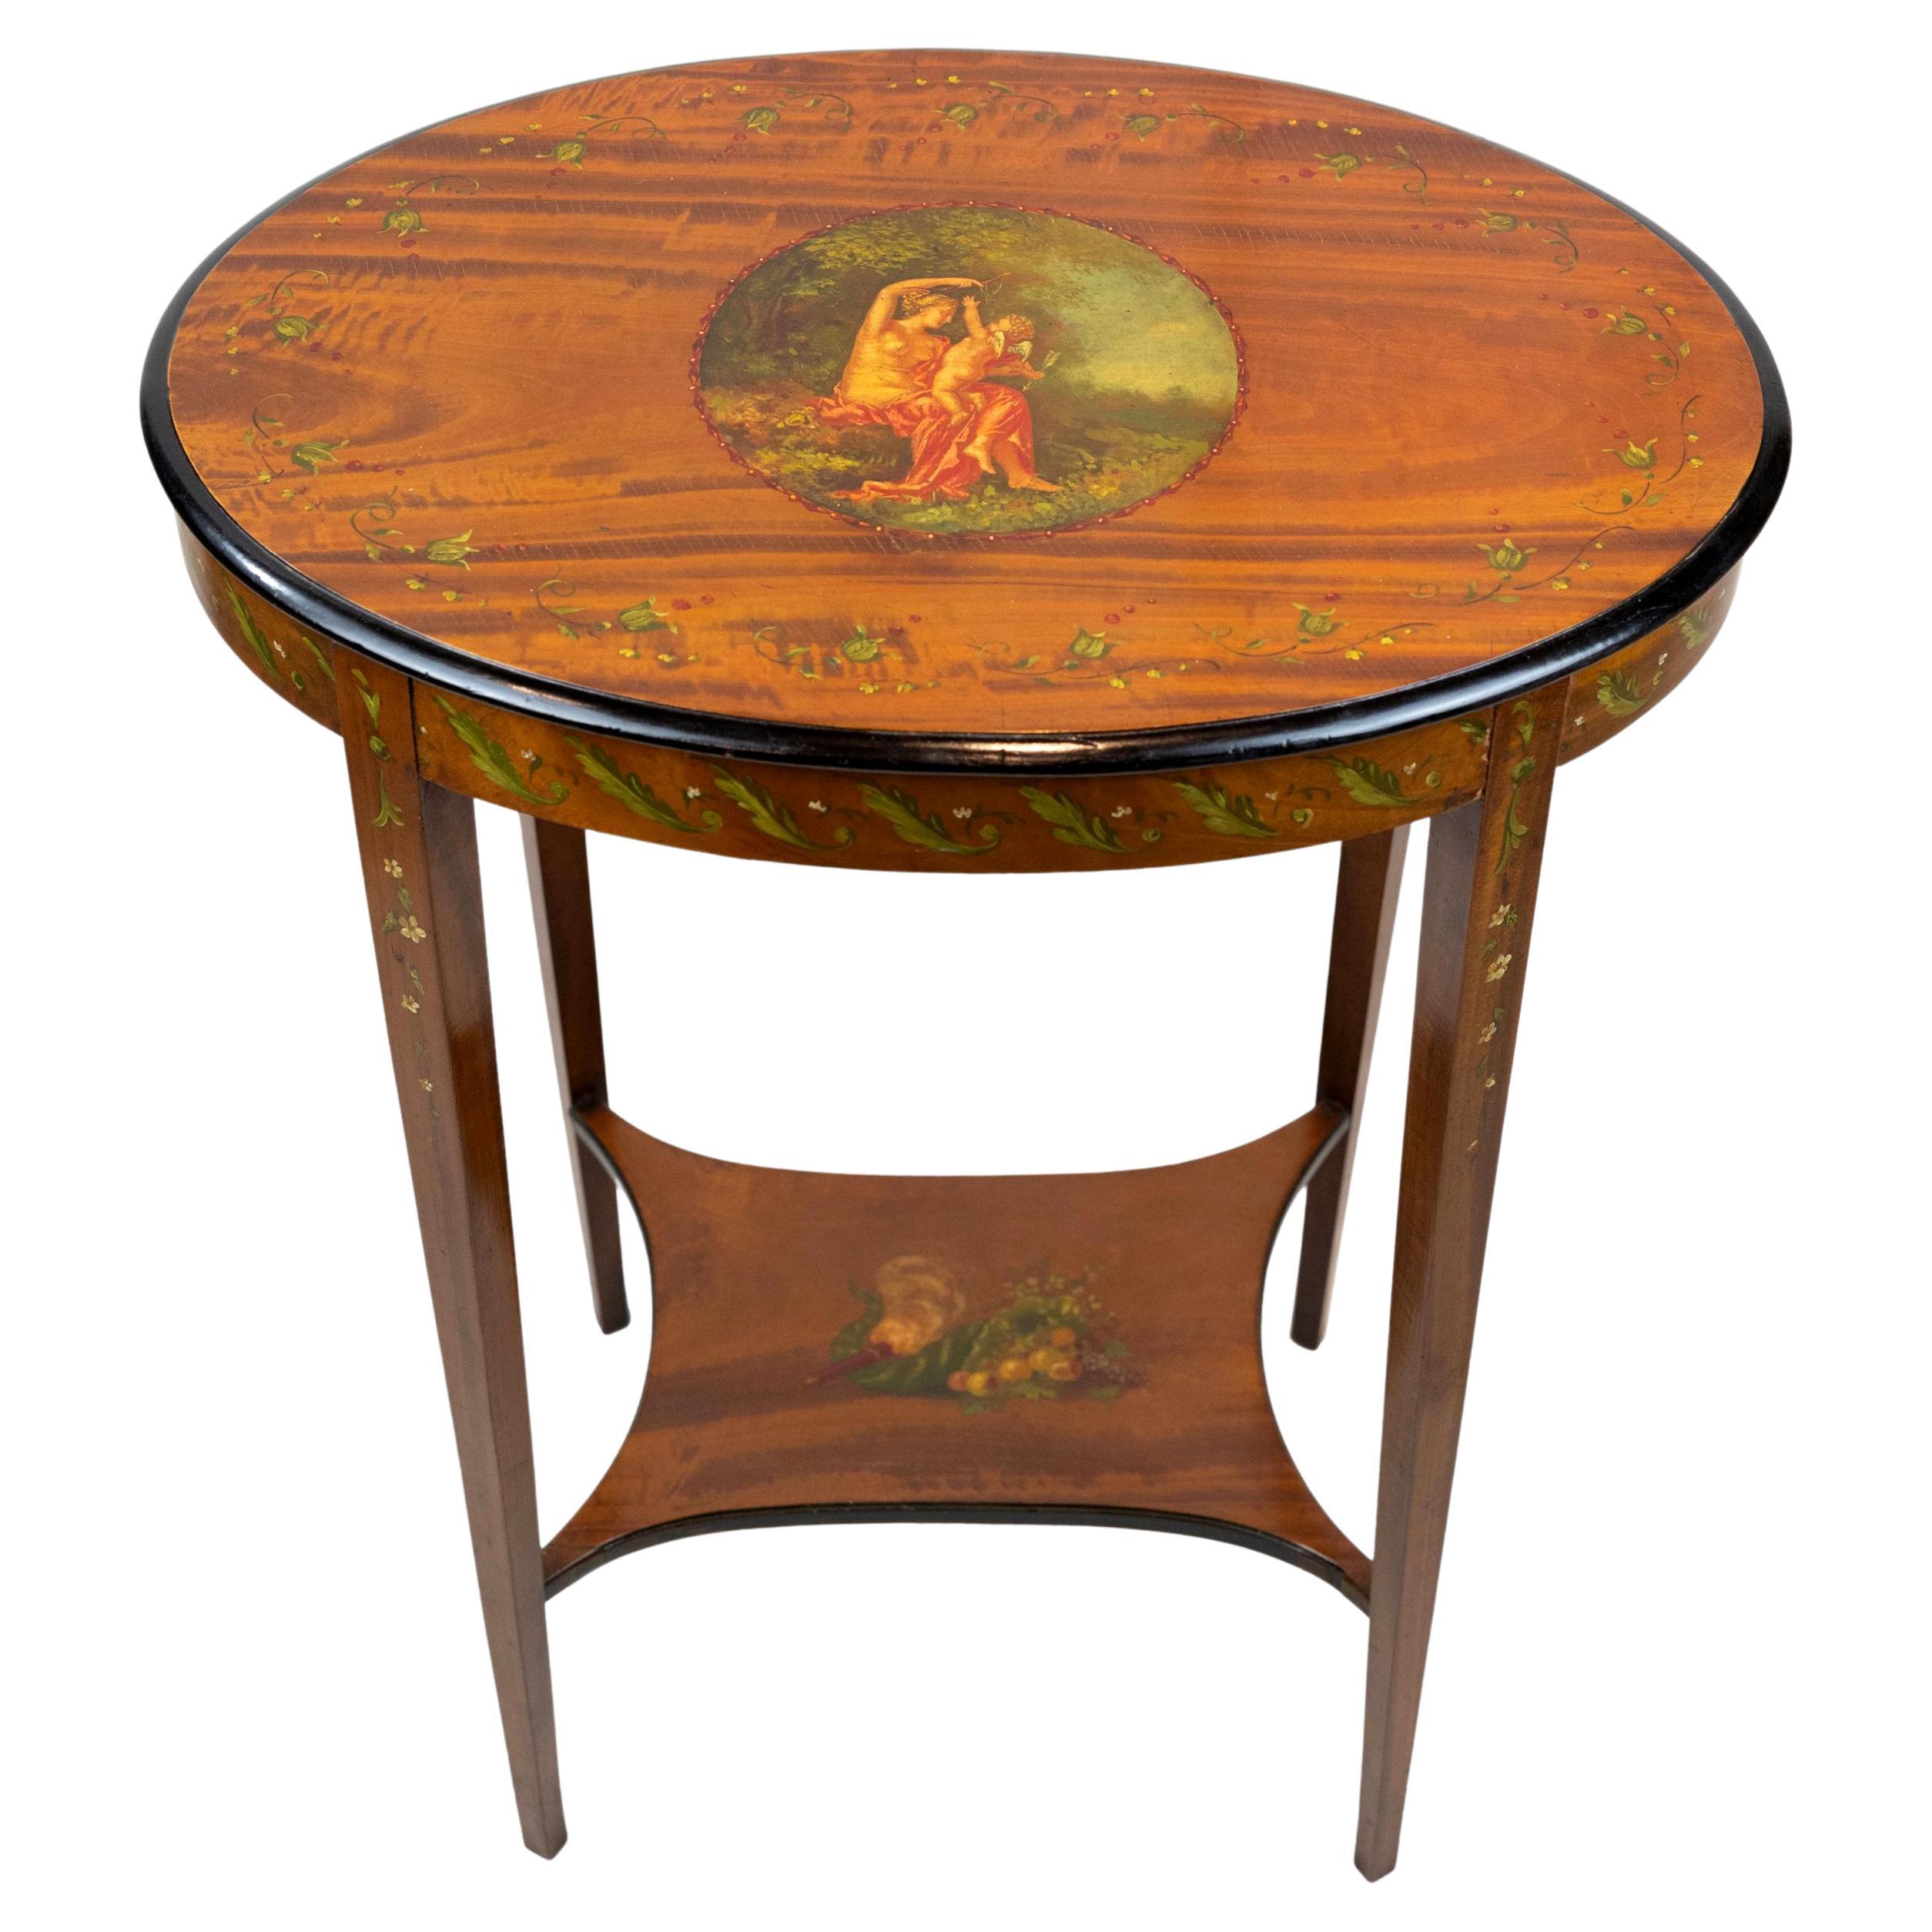 Edwardian Painted Satinwood Two-Tier Occasional Table, English, ca. 1900 For Sale